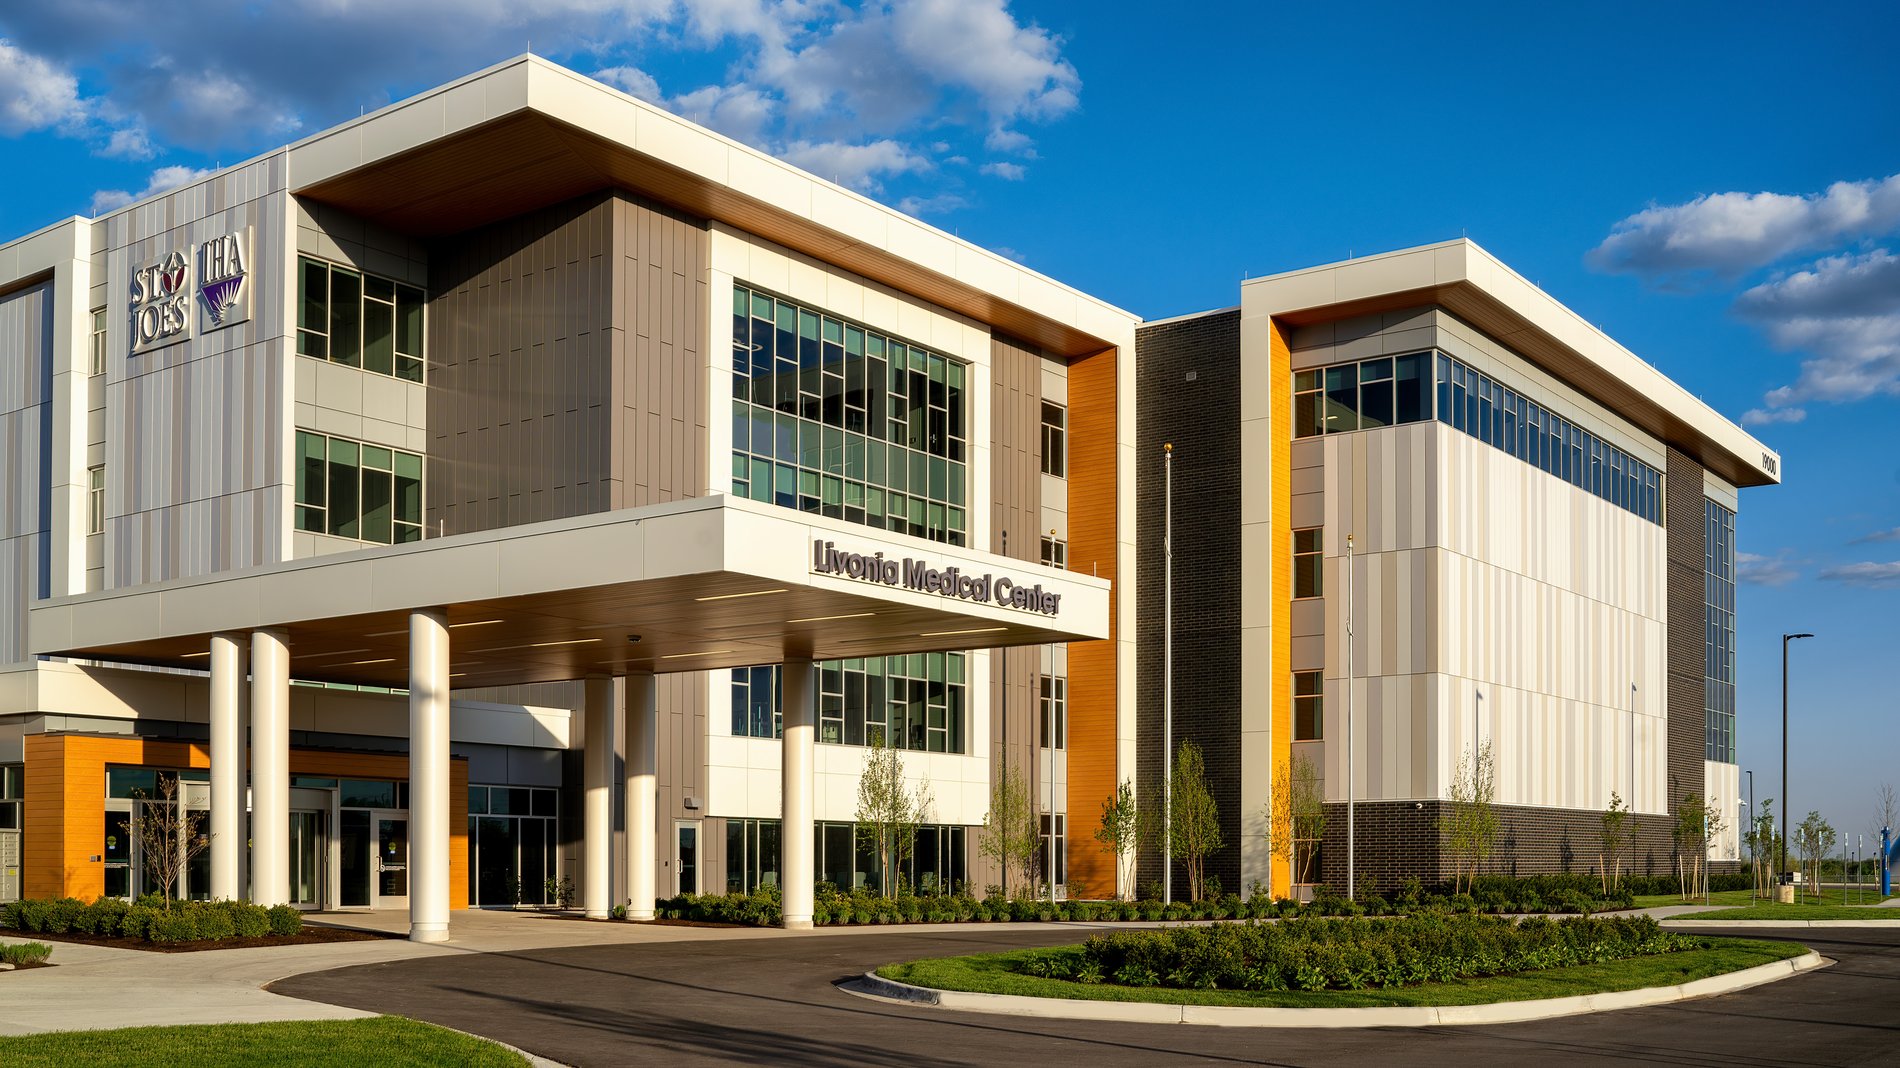 IHA Livonia Pediatrics is located in the Livonia Medical Center on the campus of Schoolcraft College.